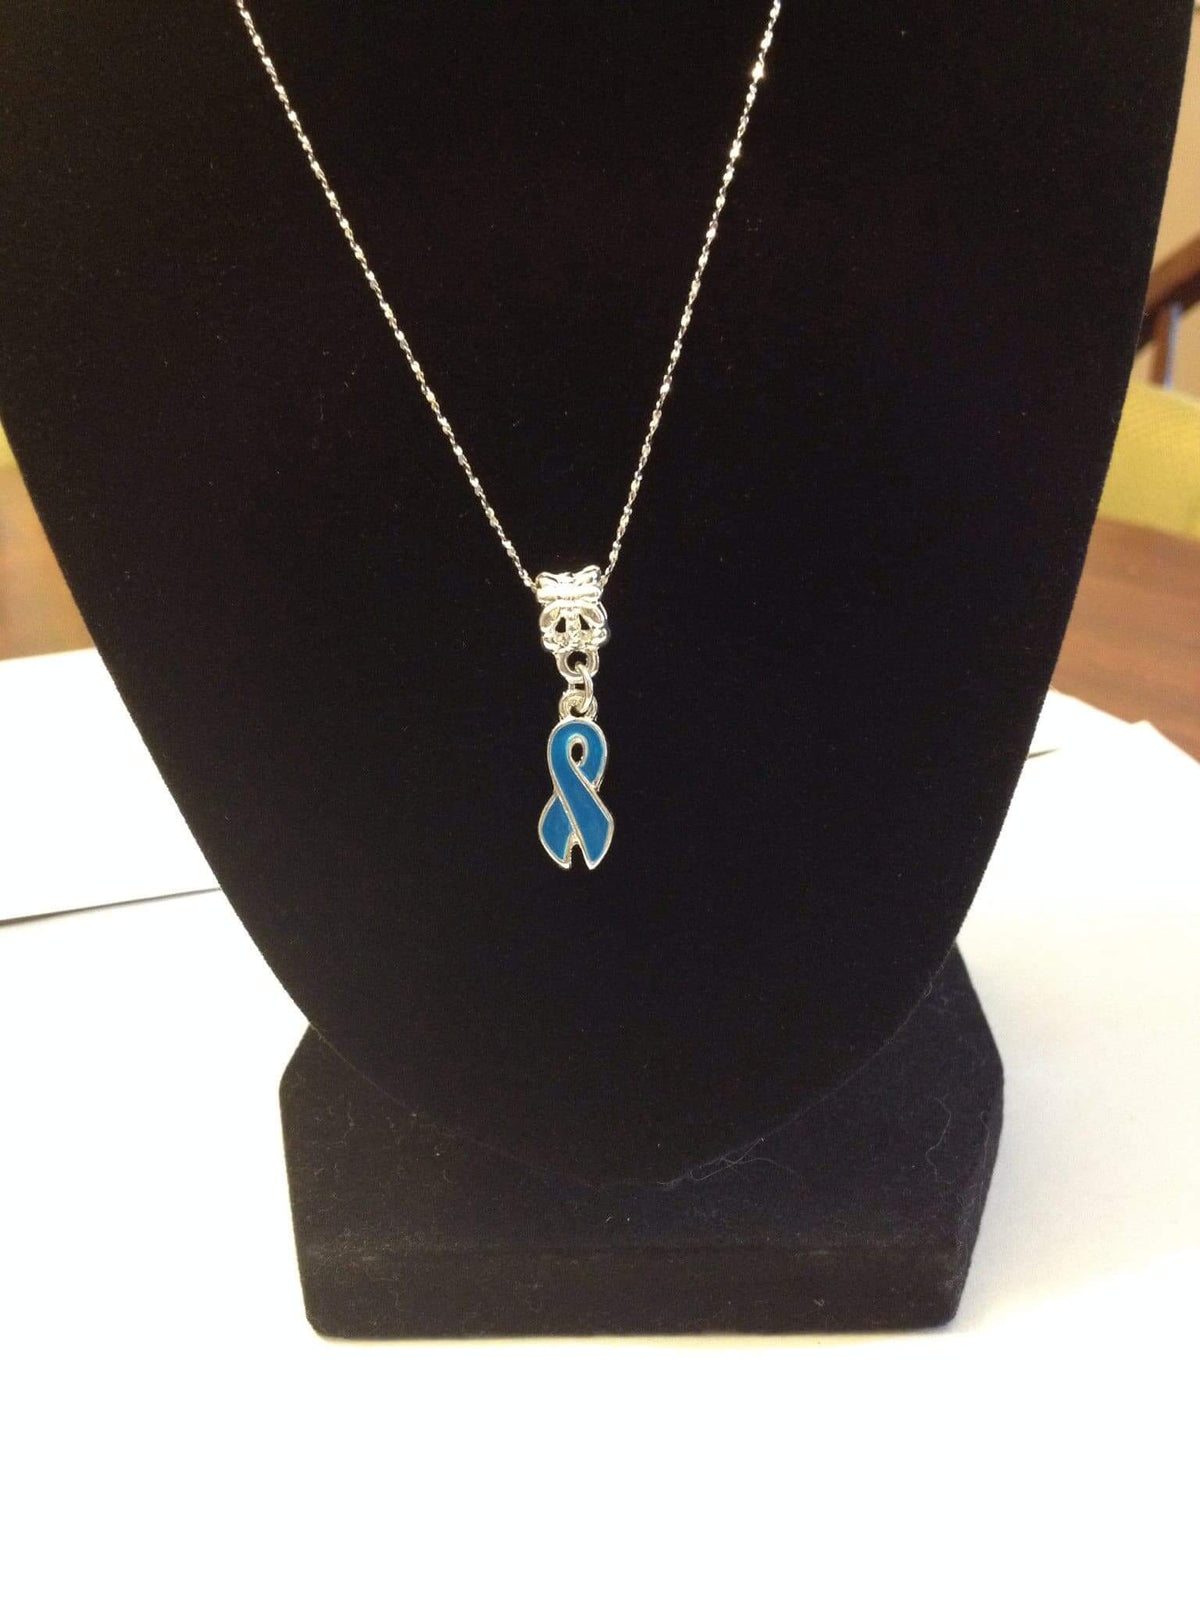 Blue Ribbon Necklace for Causes - The House of Awareness